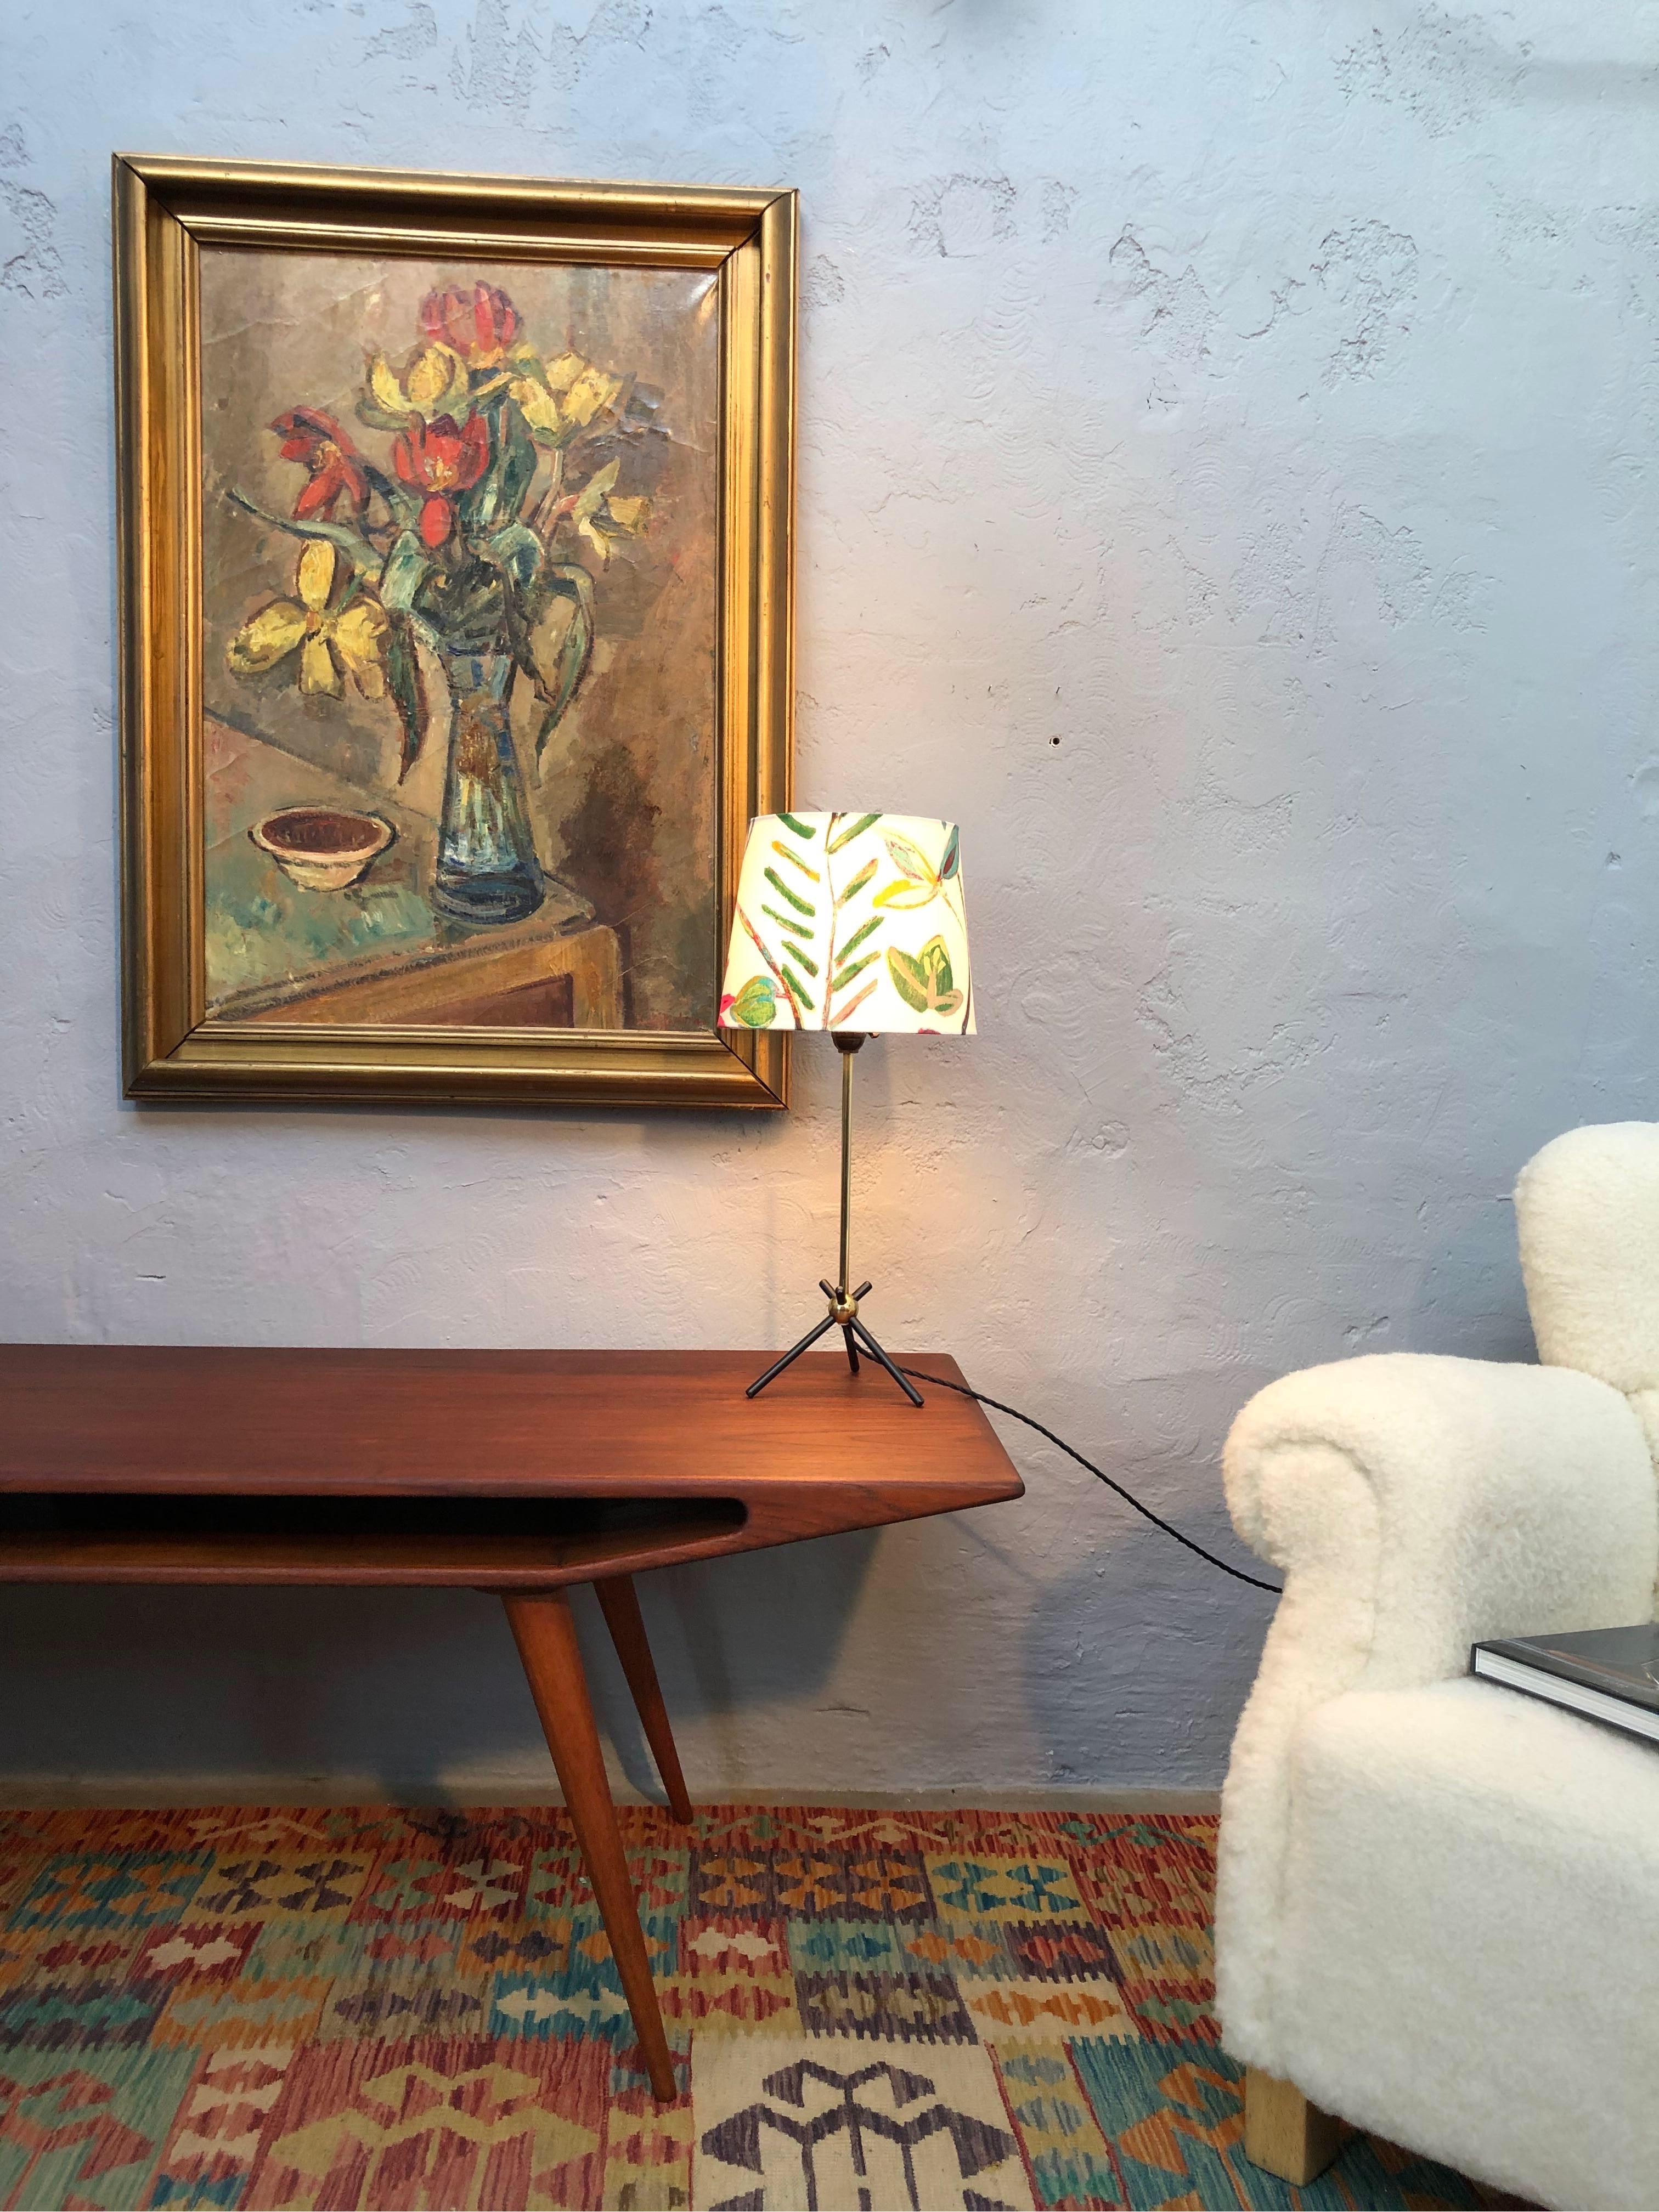 Vintage Mid-Century Modern table lamp with a very stylish period design.
Three legged steel base attached to a brass stem.
Rewired with a black twisted cloth flex and grounded.
Original Bakelite lamp holder with on off switch.
In house made